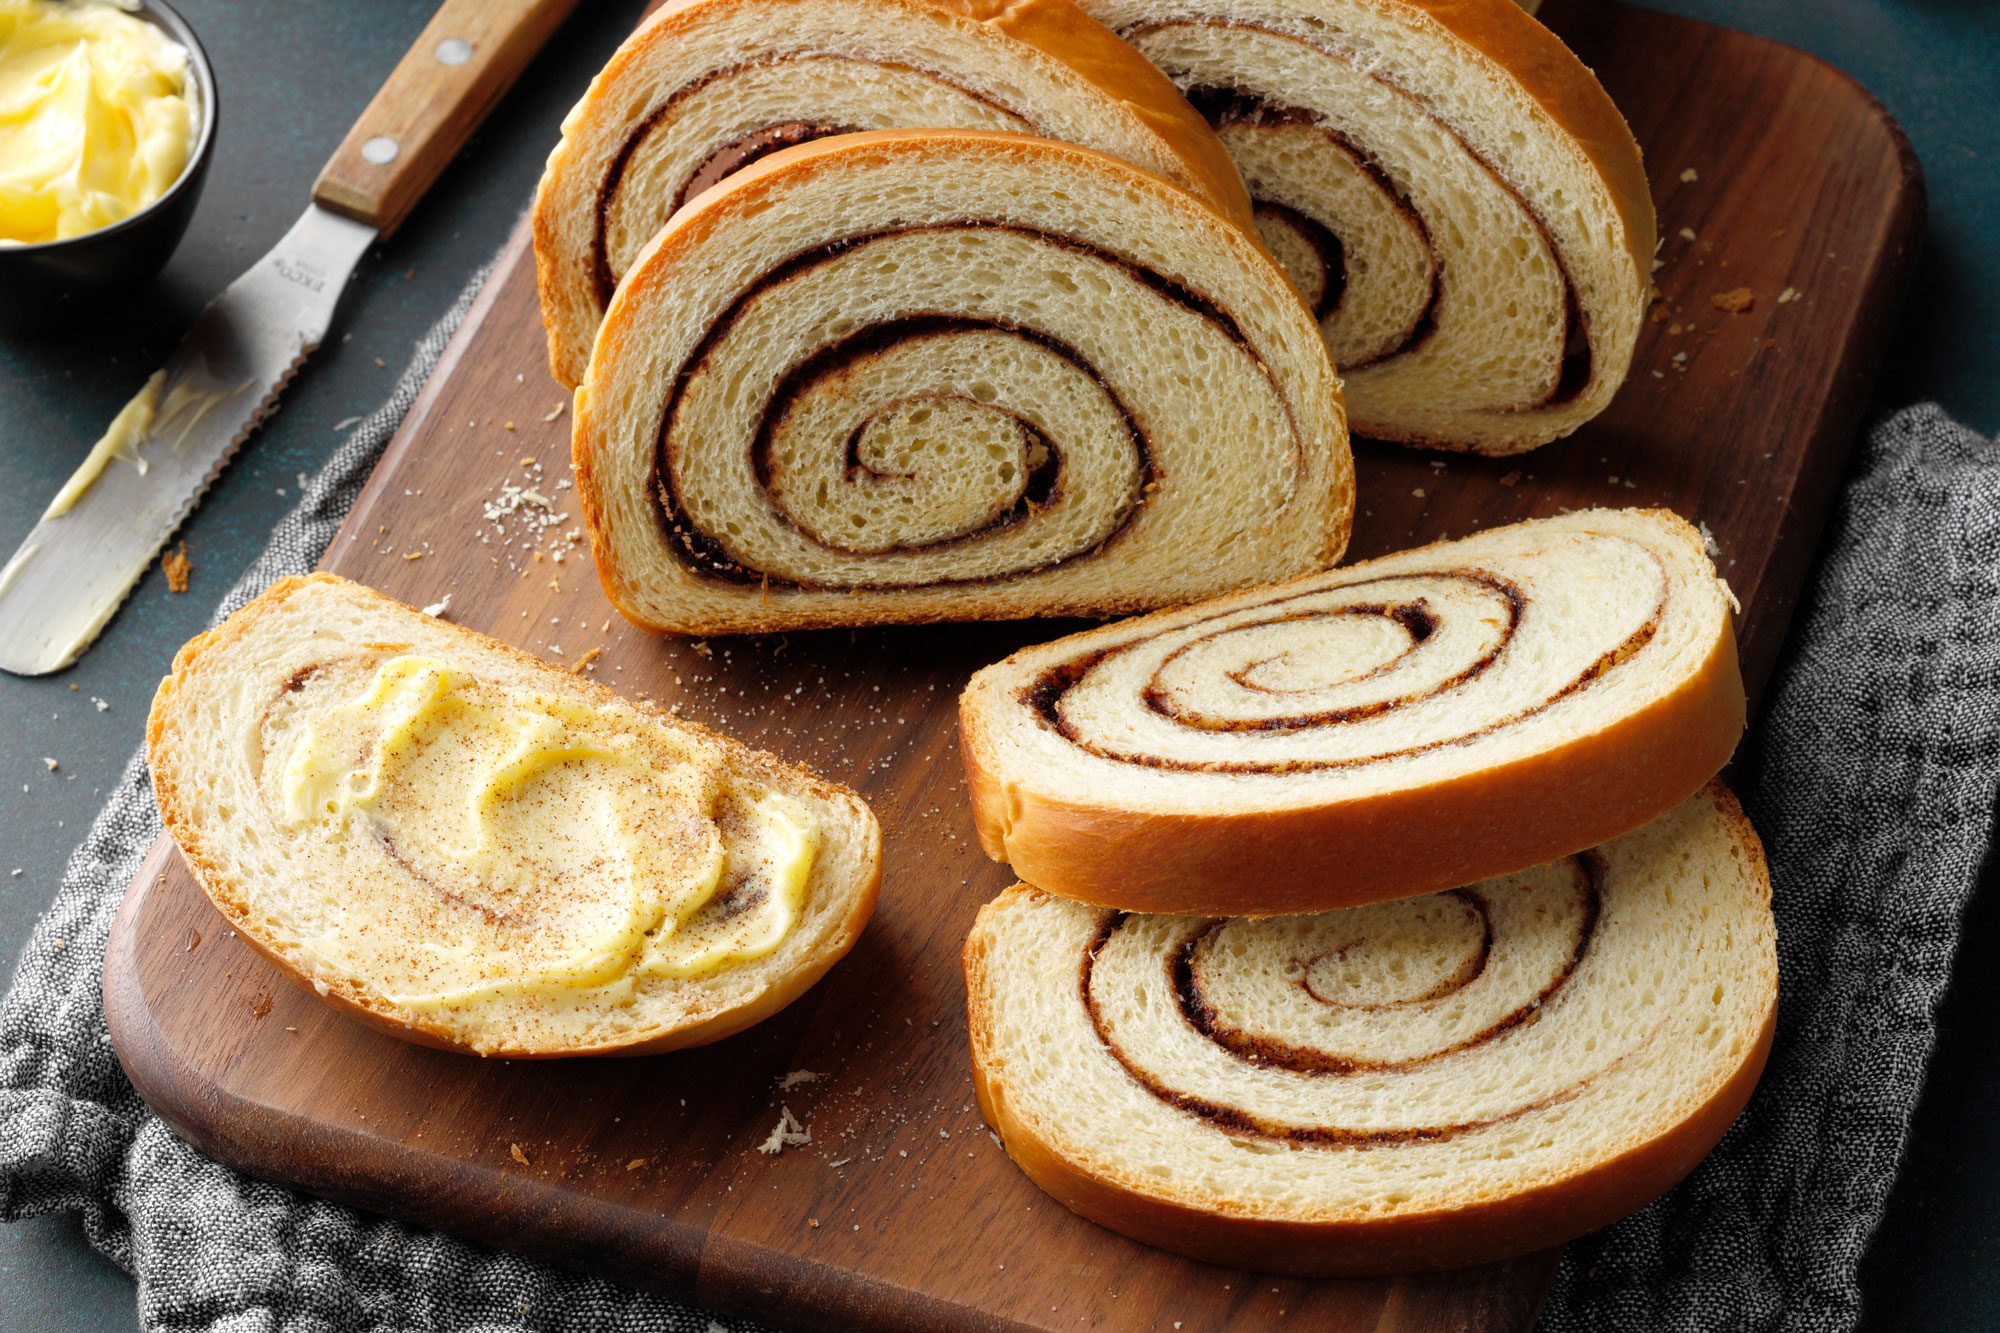 Delicious Cinnamon Swirl Bread served with butter on a wooden board